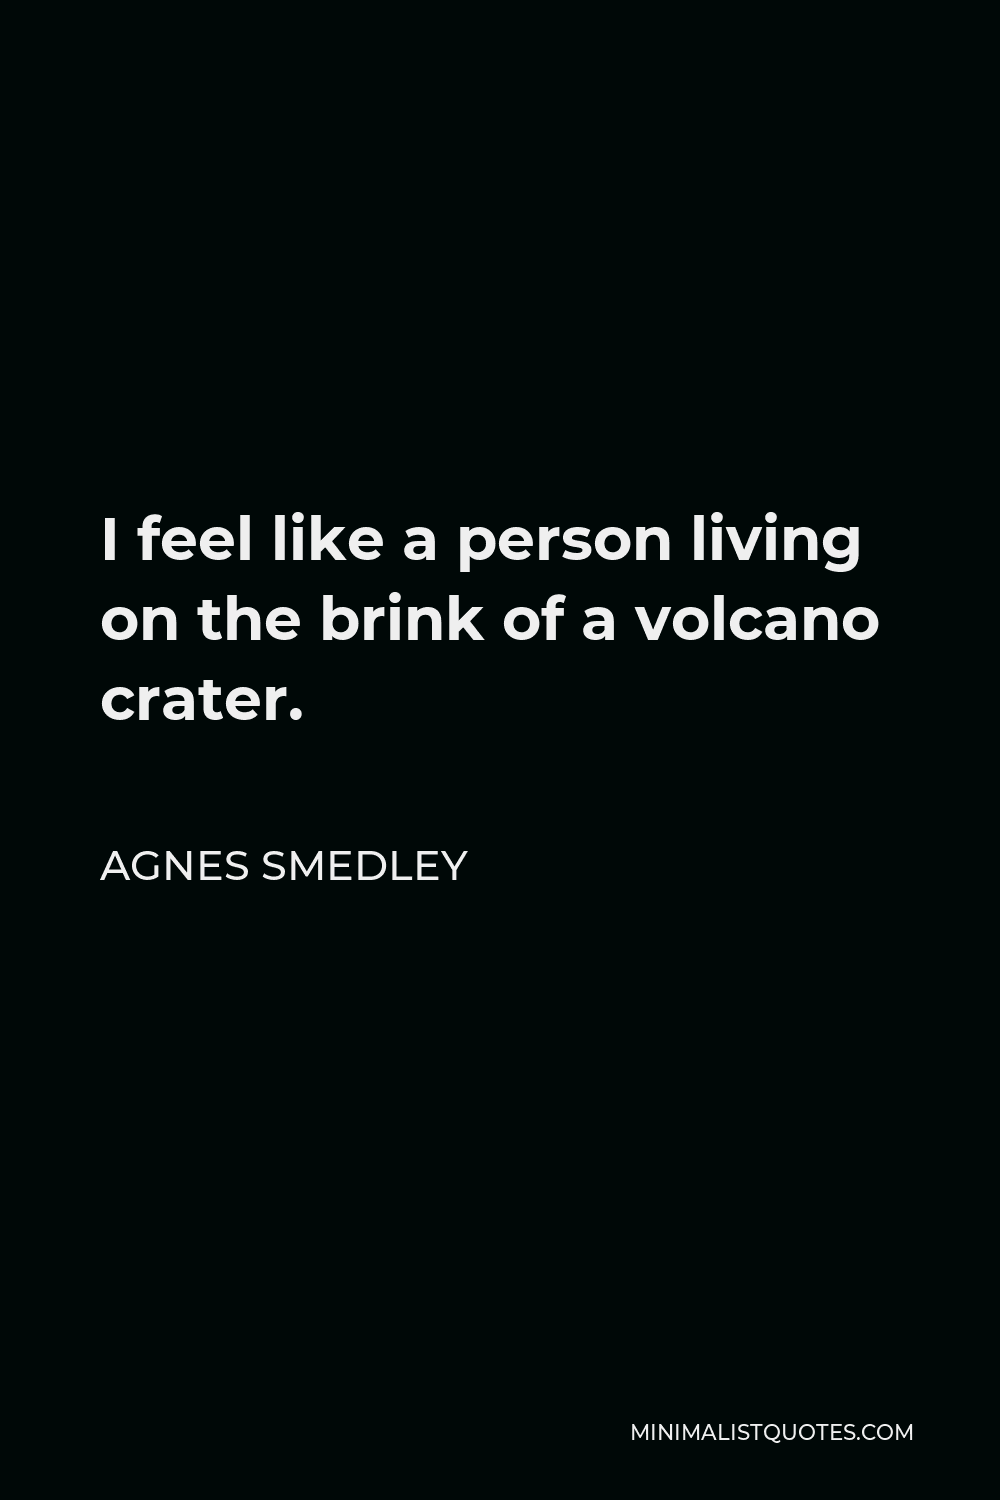 Agnes Smedley Quote - I feel like a person living on the brink of a volcano crater.